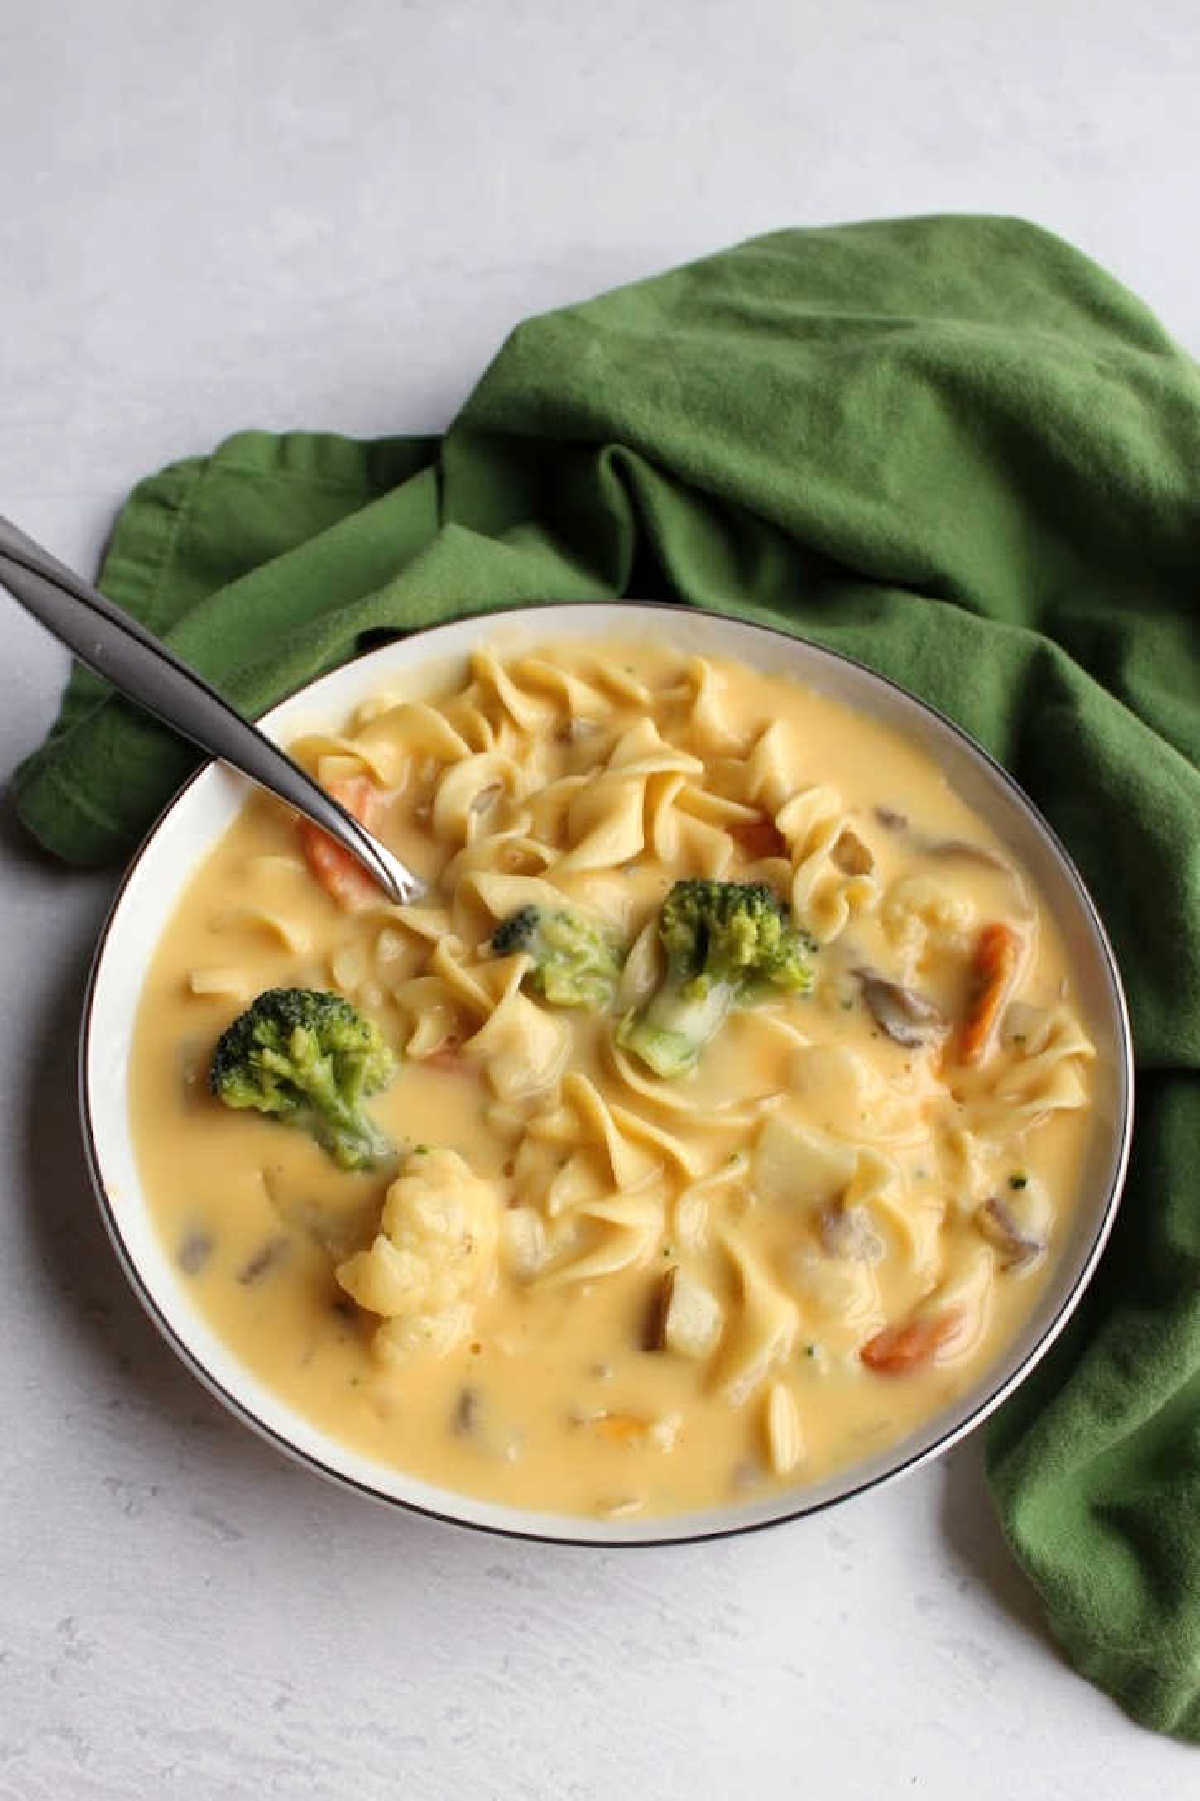 Bowl of cheese soup with wide egg noodles, broccoli, cauliflower, carrots, potatoes and mushrooms inside. 